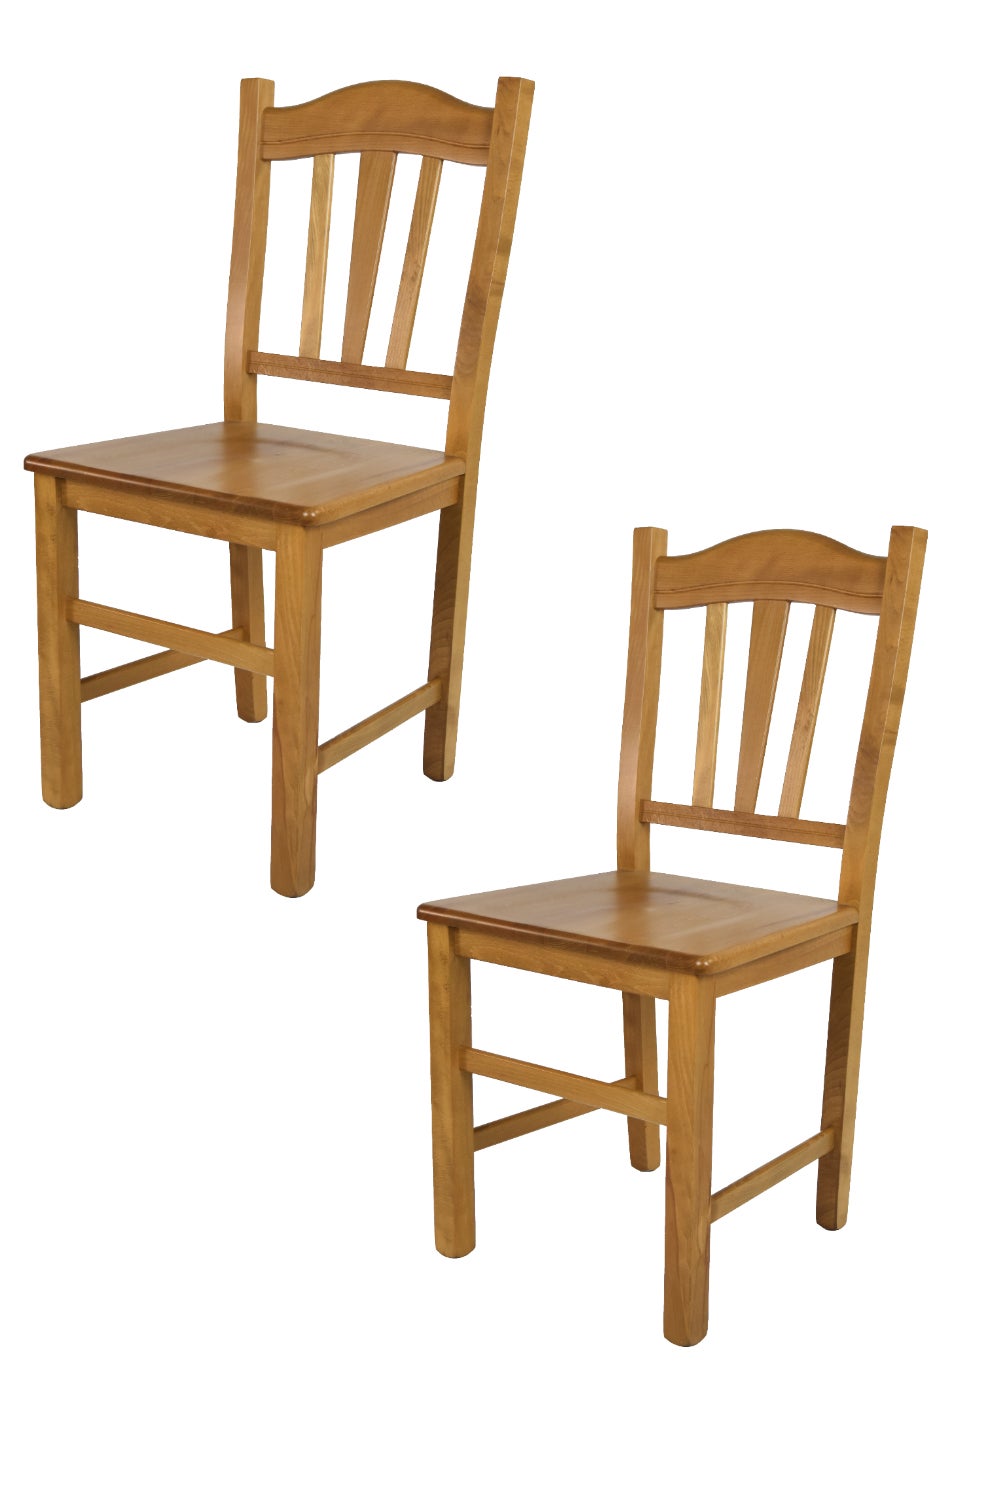 not treated Tommychairs chairs of design Set of 2 classic chairs SILVANA suitable for kitchen bar and dining room with strong structure in polished beechwood 100% natural and seat in straw 